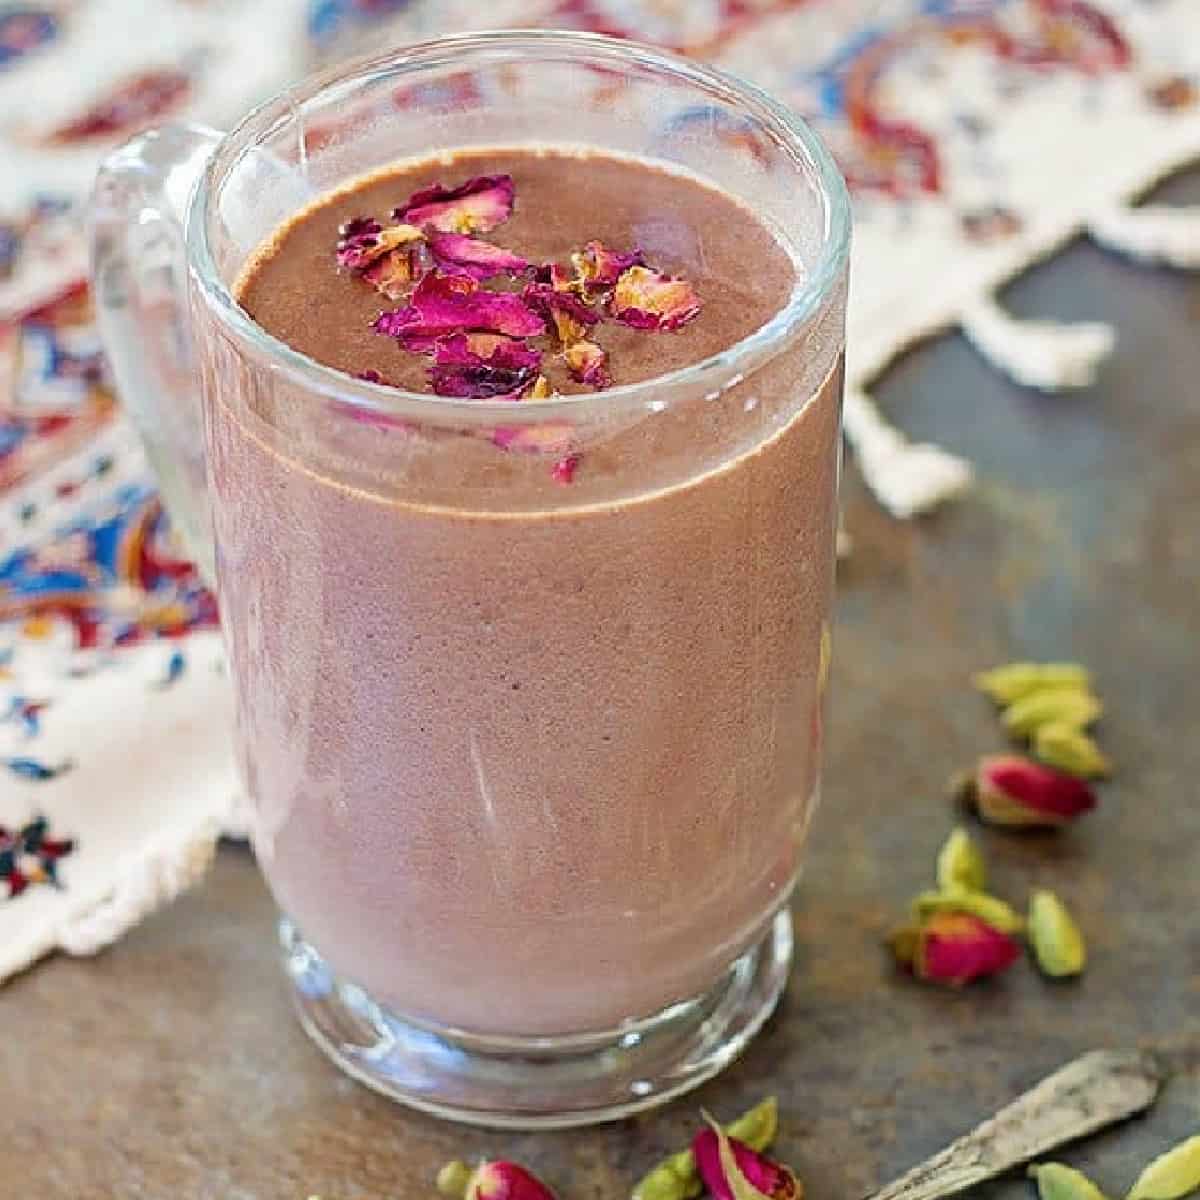 Rich Cardamom Rose Hot Chocolate is a delicious cozy drink for cold winter evenings. Quality chocolate melted in milk and infused with Middle Eastern ingredients makes for a dreamy drink.
